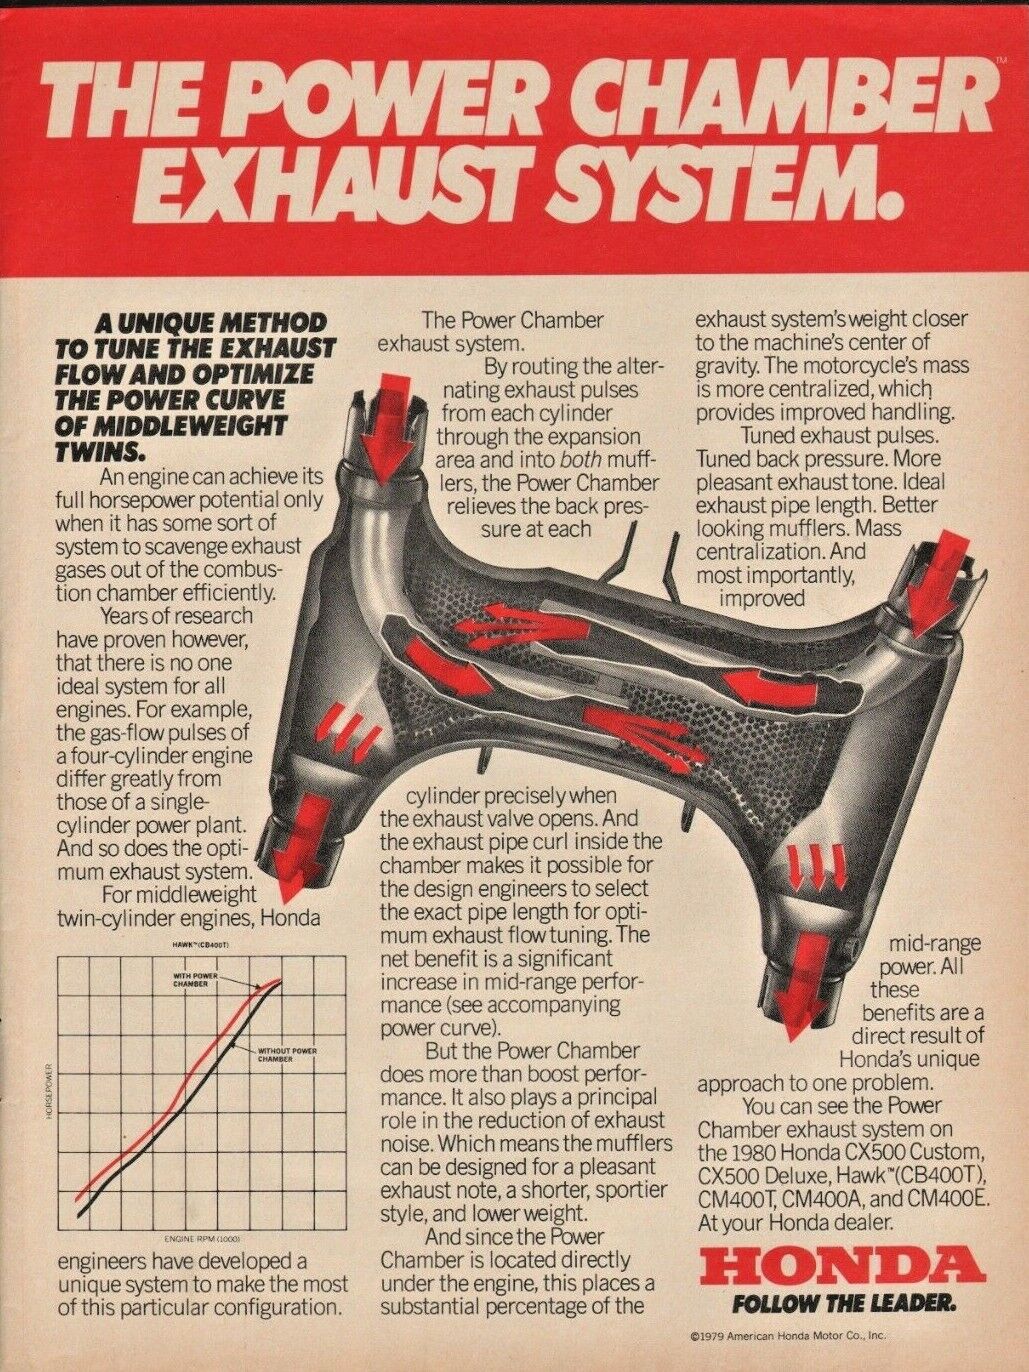 1979 Honda Power Chamber Exhaust System - Vintage Motorcycle Ad